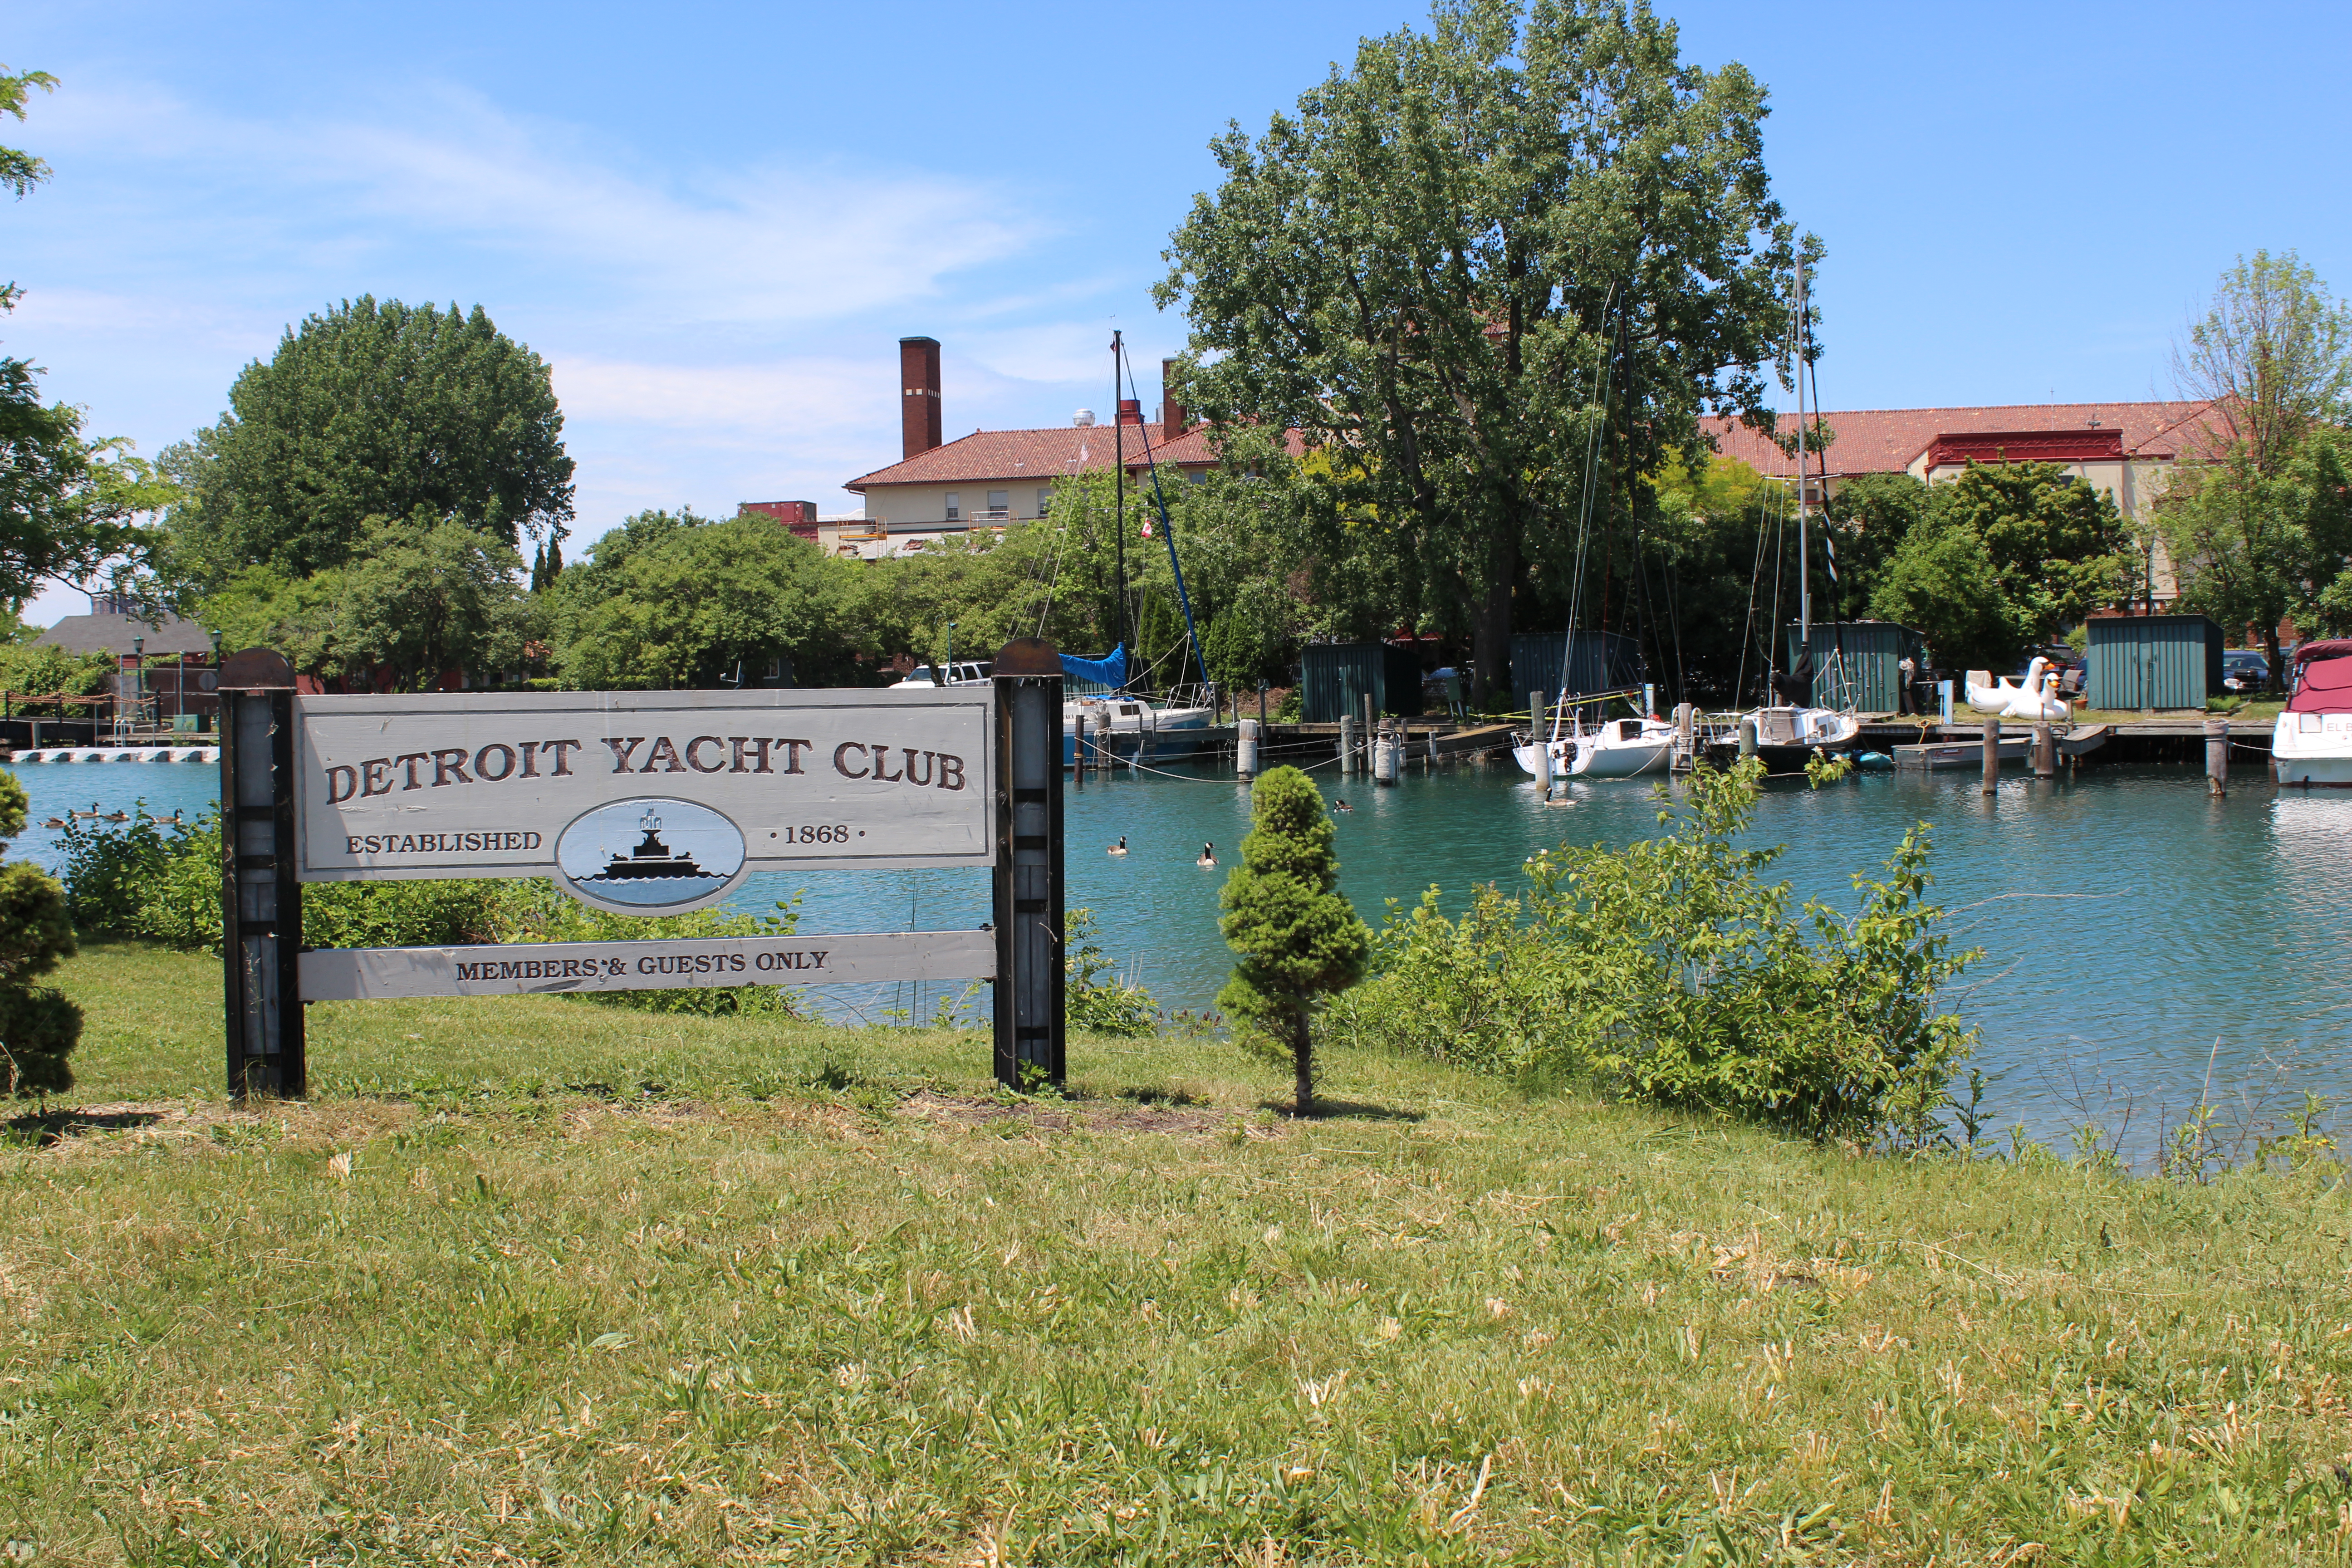 Detroit Yacht Club sign with sail boats on the dock behind it